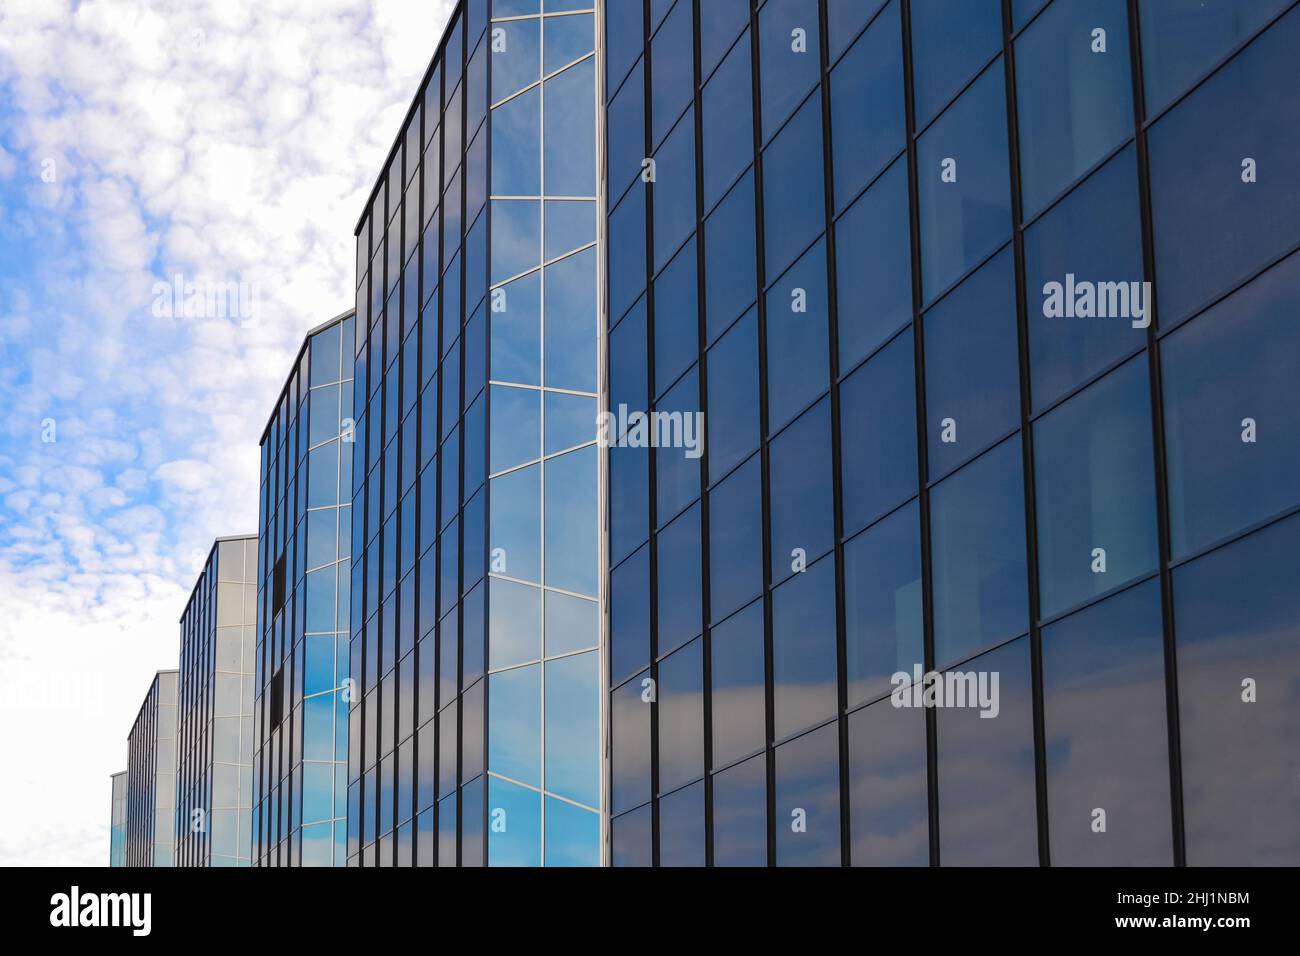 A glass building against a blue sky and clouds Stock Photo